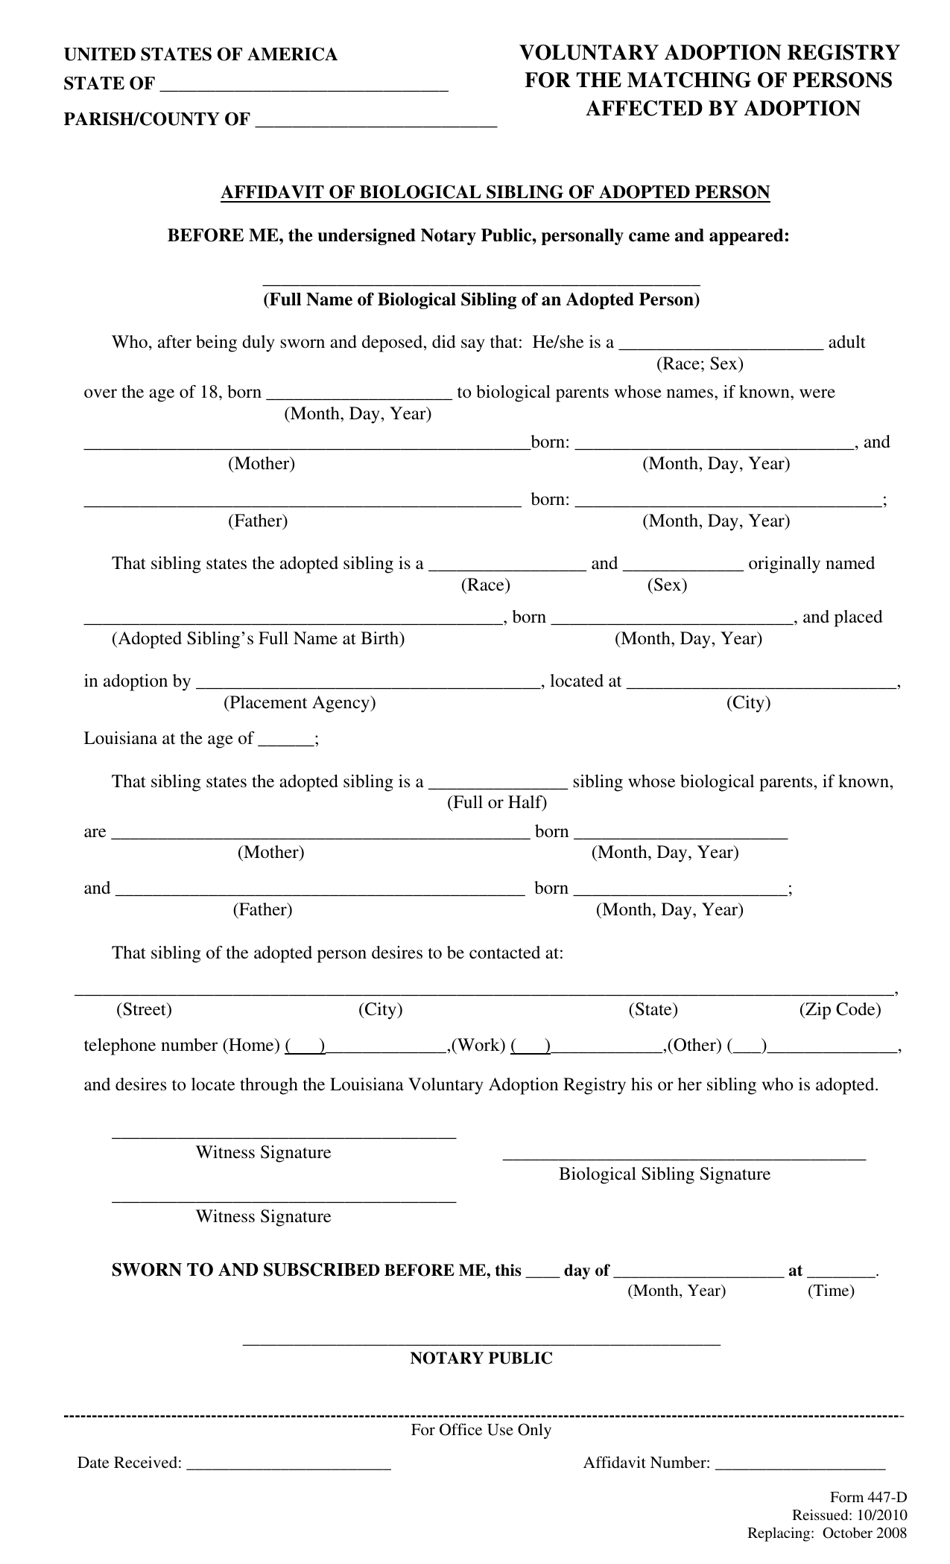 Form 447-D Affidavit of Biological Sibling of Adopted Person - Louisiana, Page 1